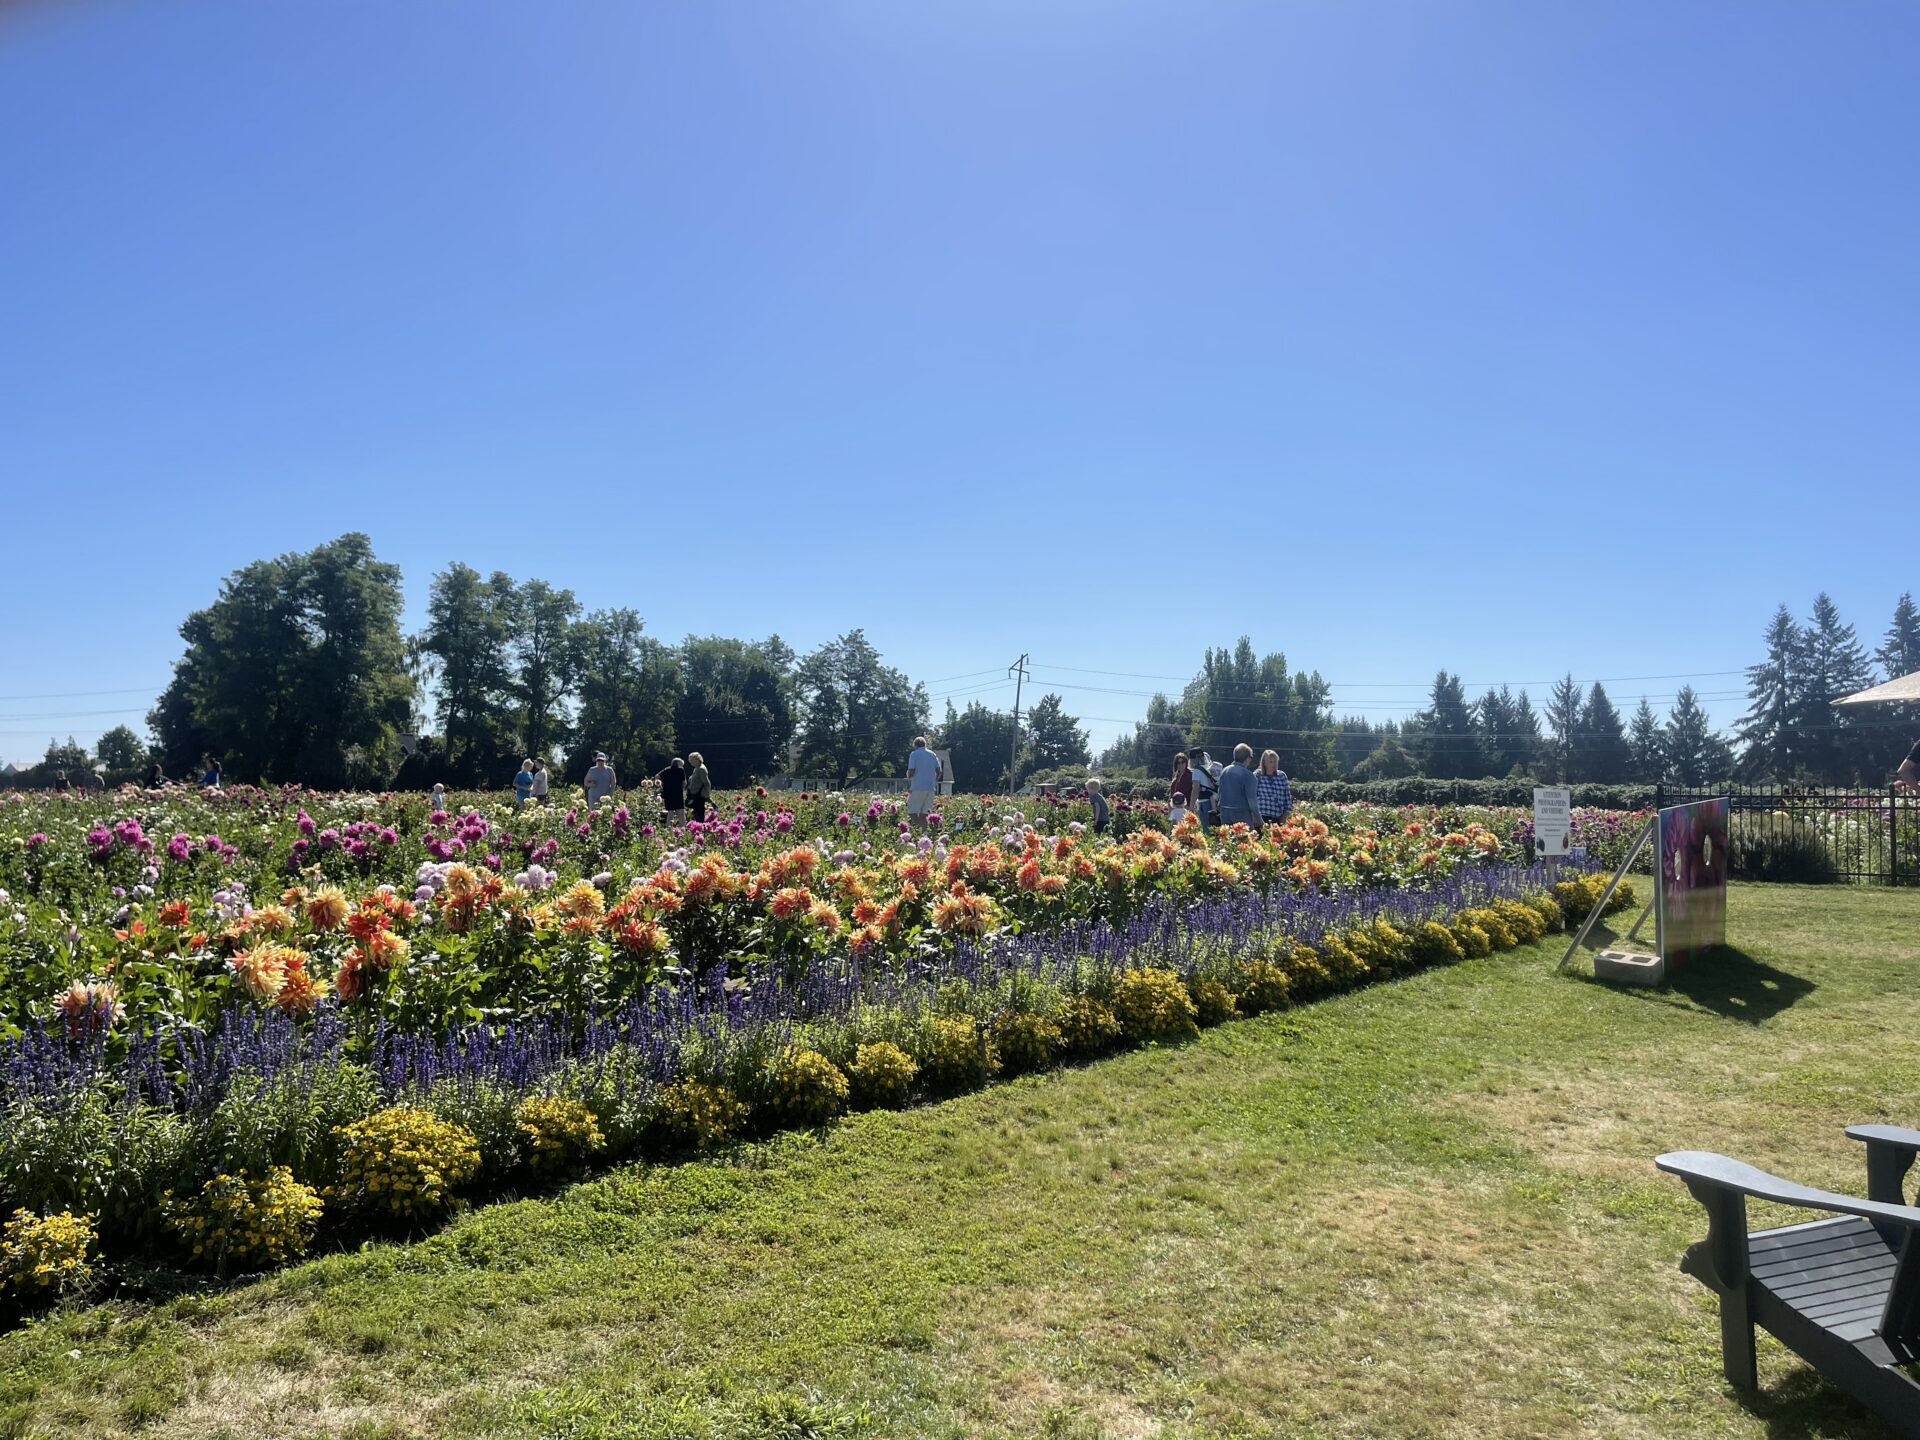 Rows of dahlias in the background behind a grassy patch with clear sky above.